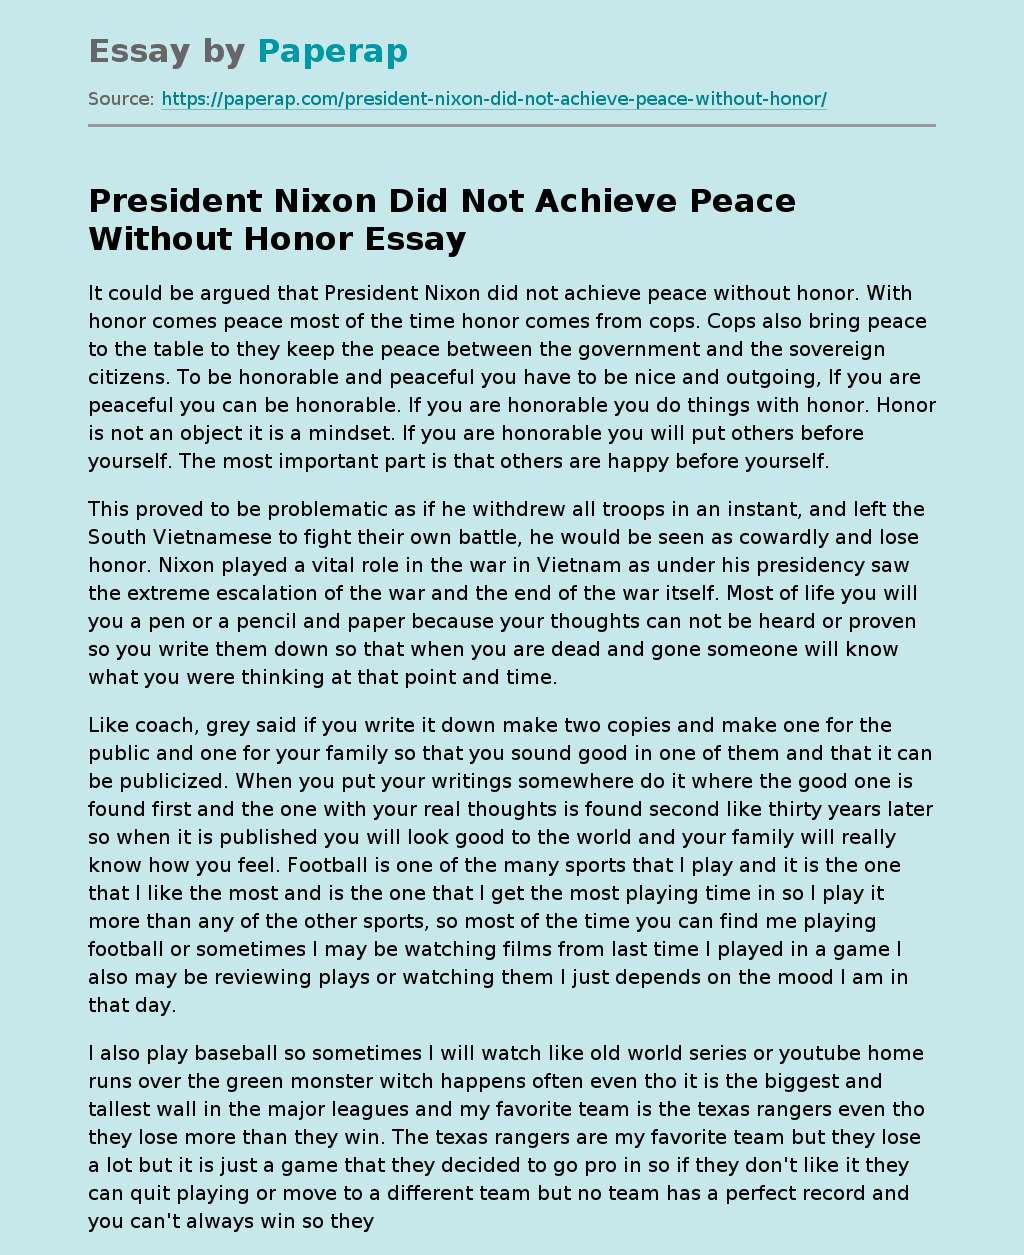 President Nixon Did Not Achieve Peace Without Honor